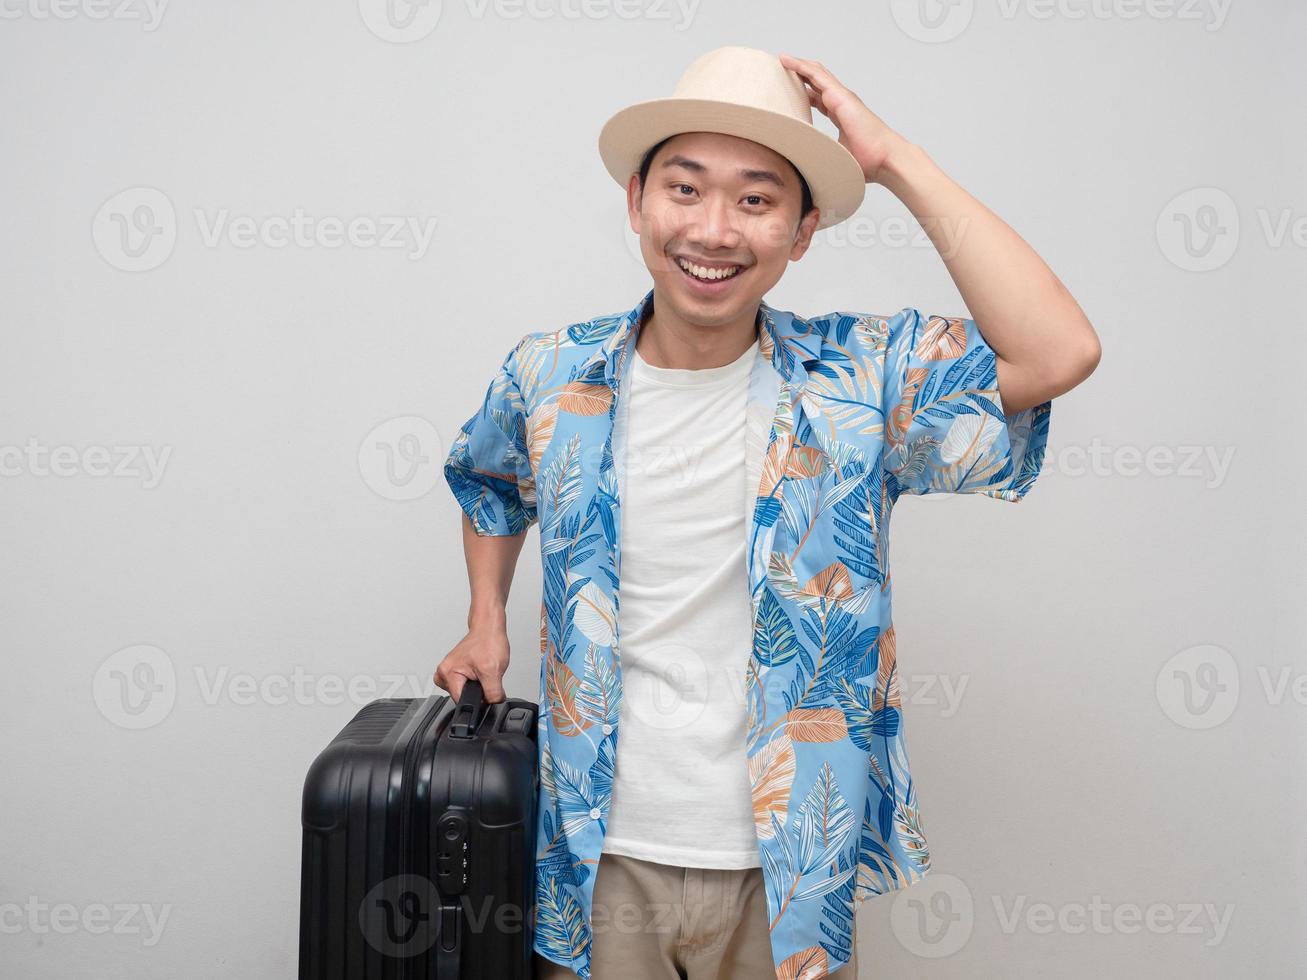 Tourism man wear hat hold luggage happiness smile portrait photo